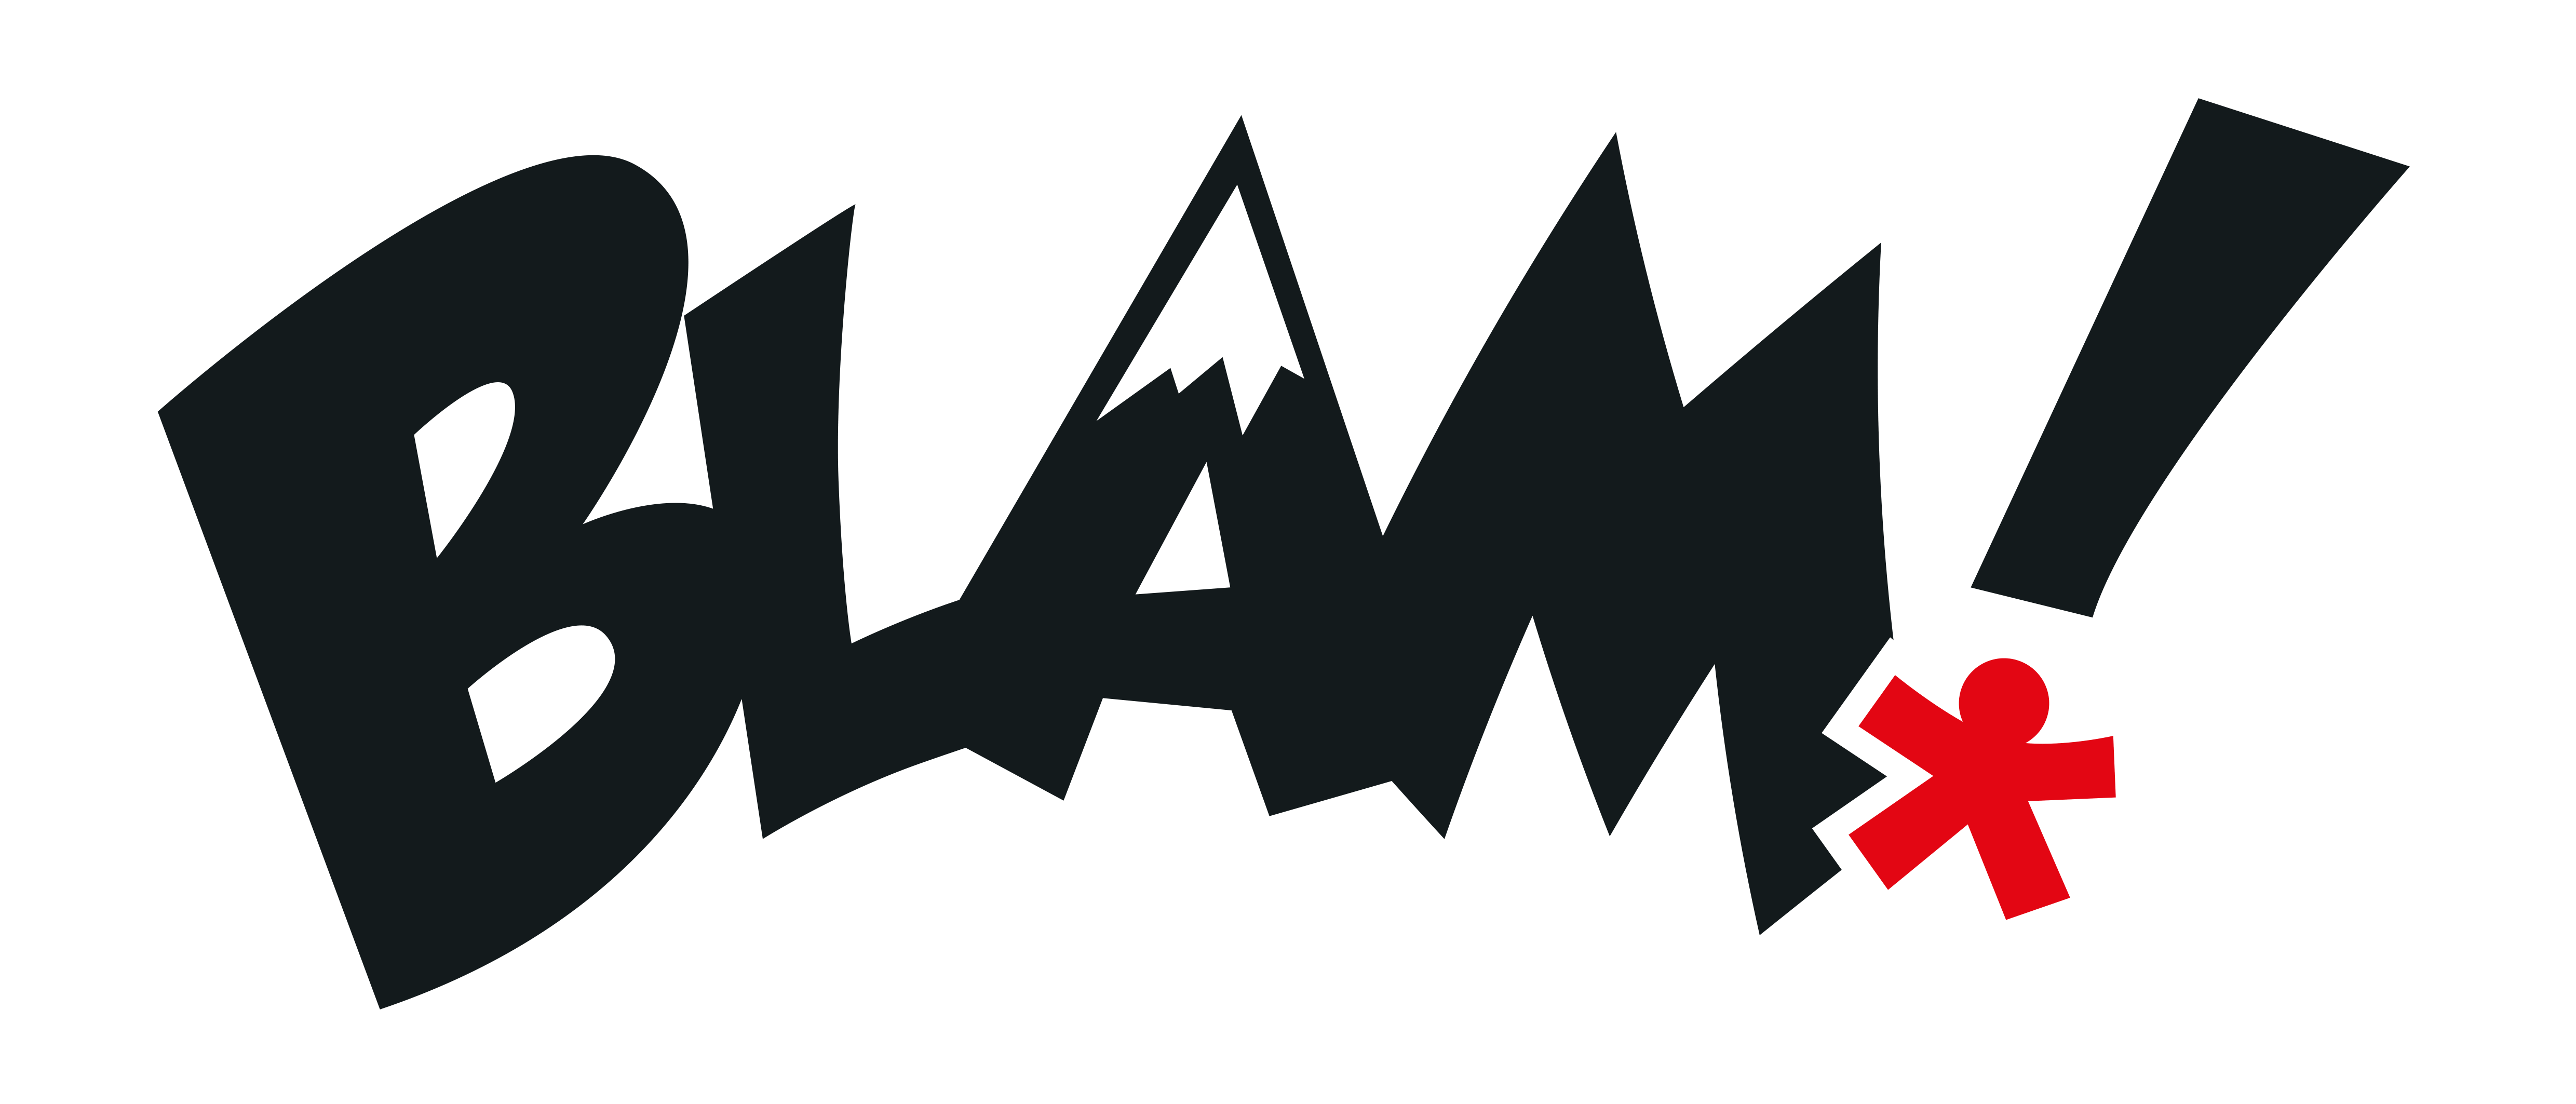 This is the company logo/link of our partner BLAM!